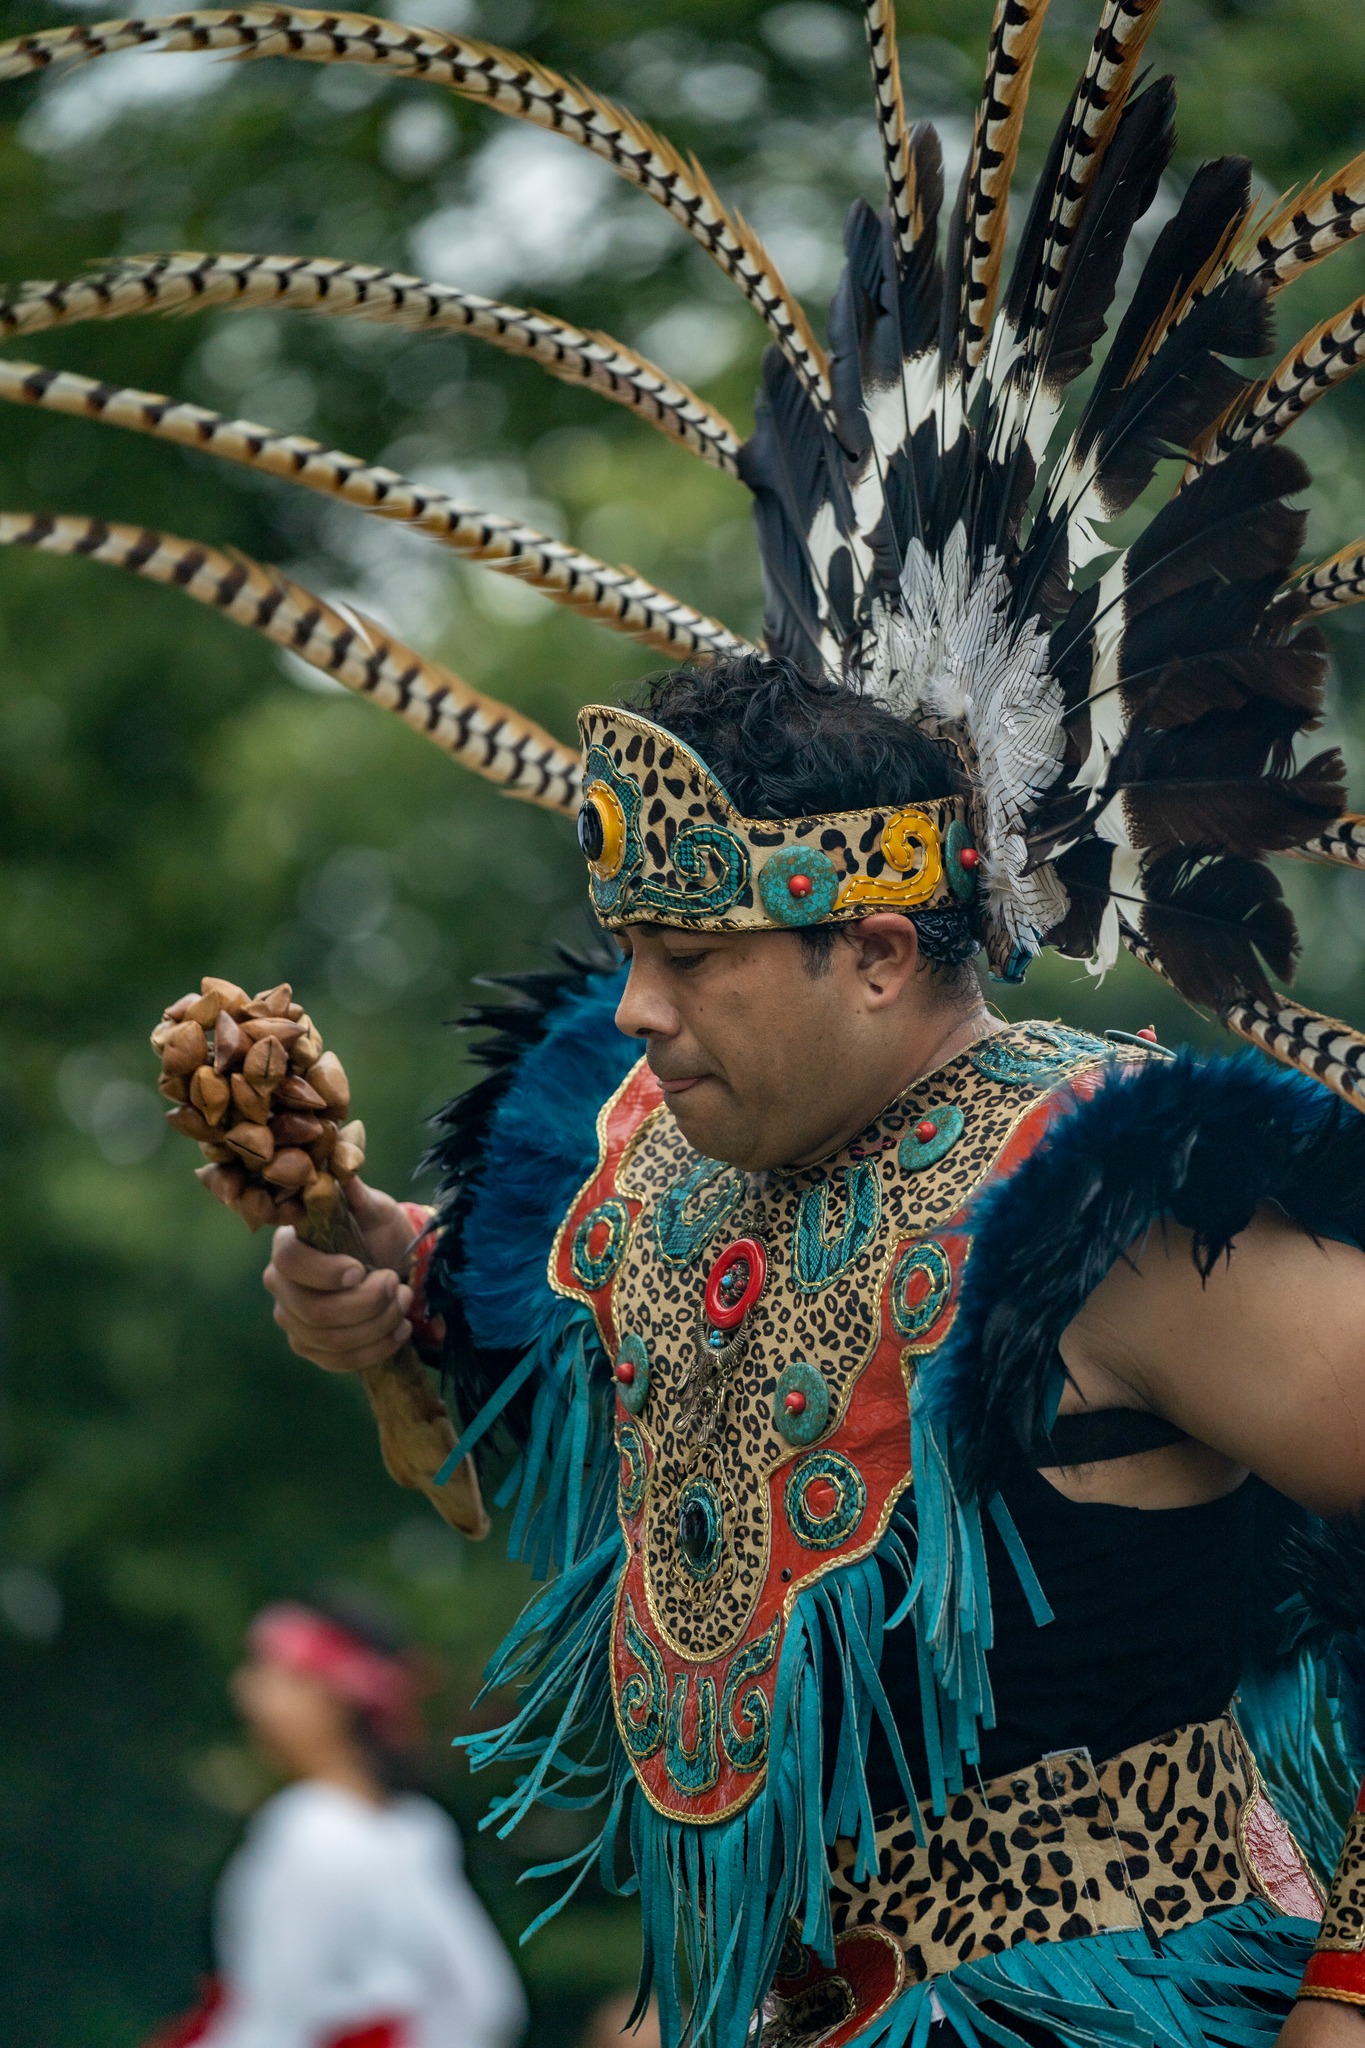 A performer wearing colorful clothing made of feathers, leopard print fabric, beading, and fringe dances and holds a percussive instrument.